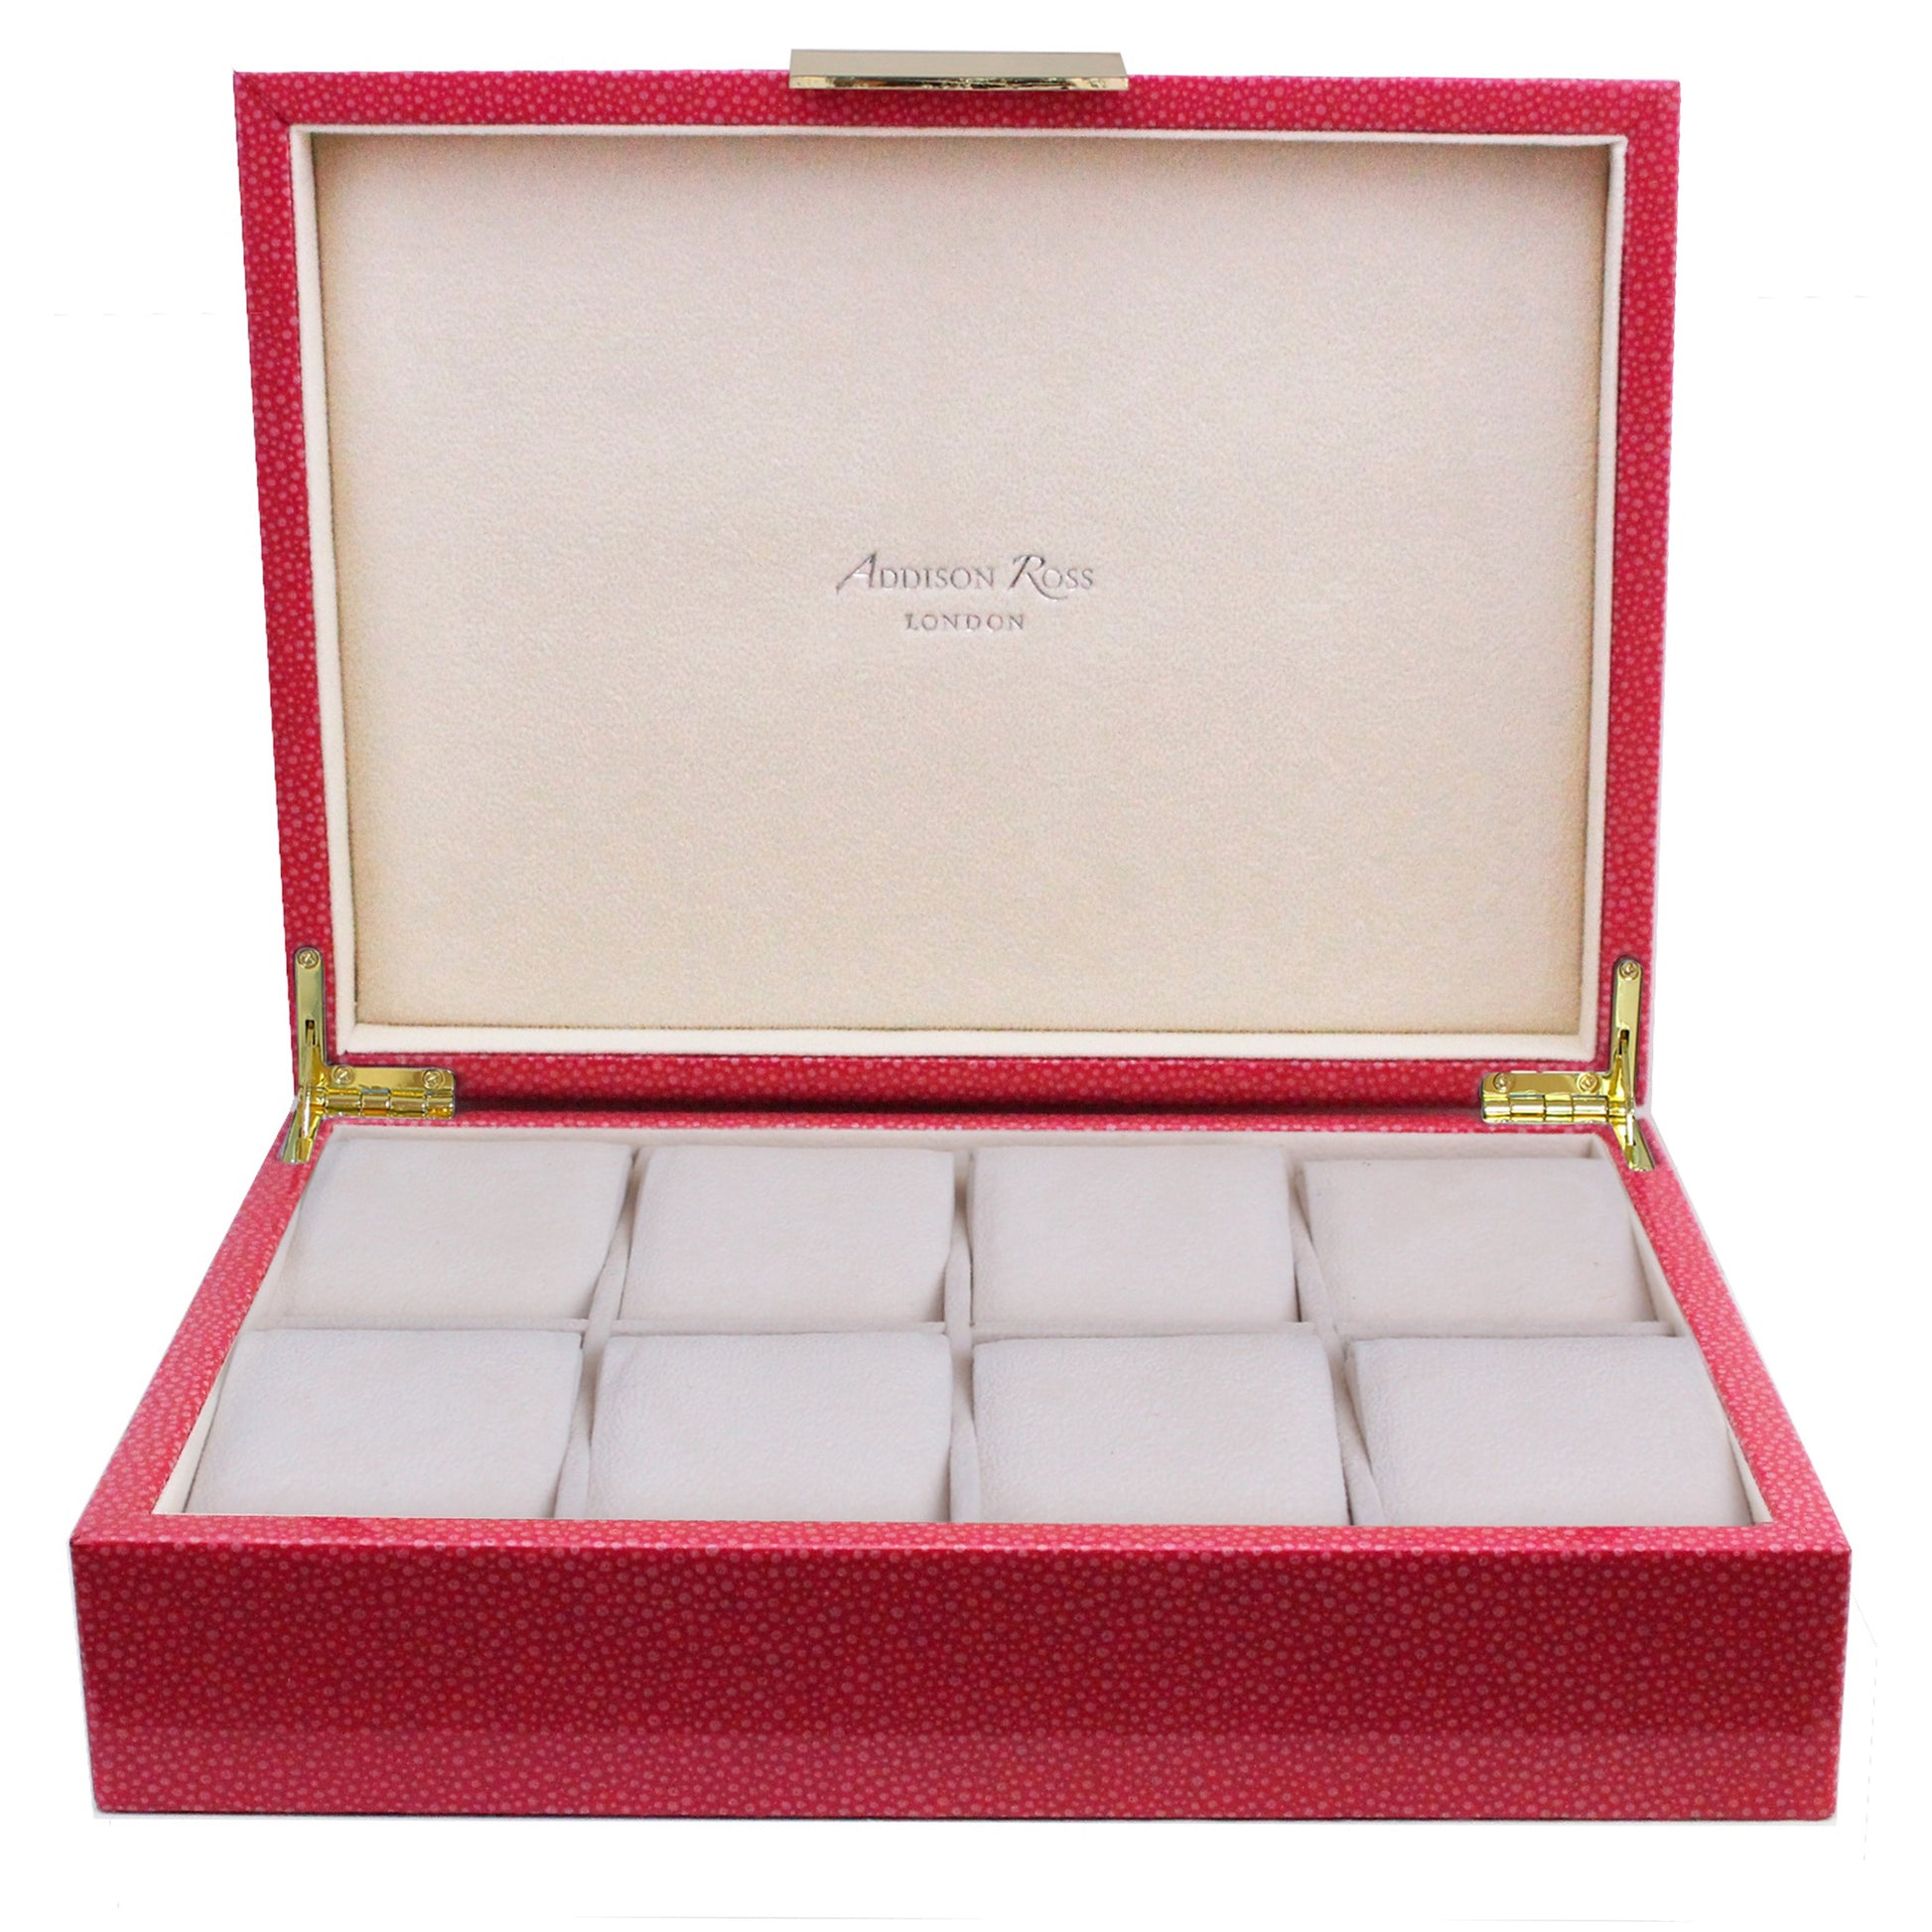 Large pink watch box with cream suede interior